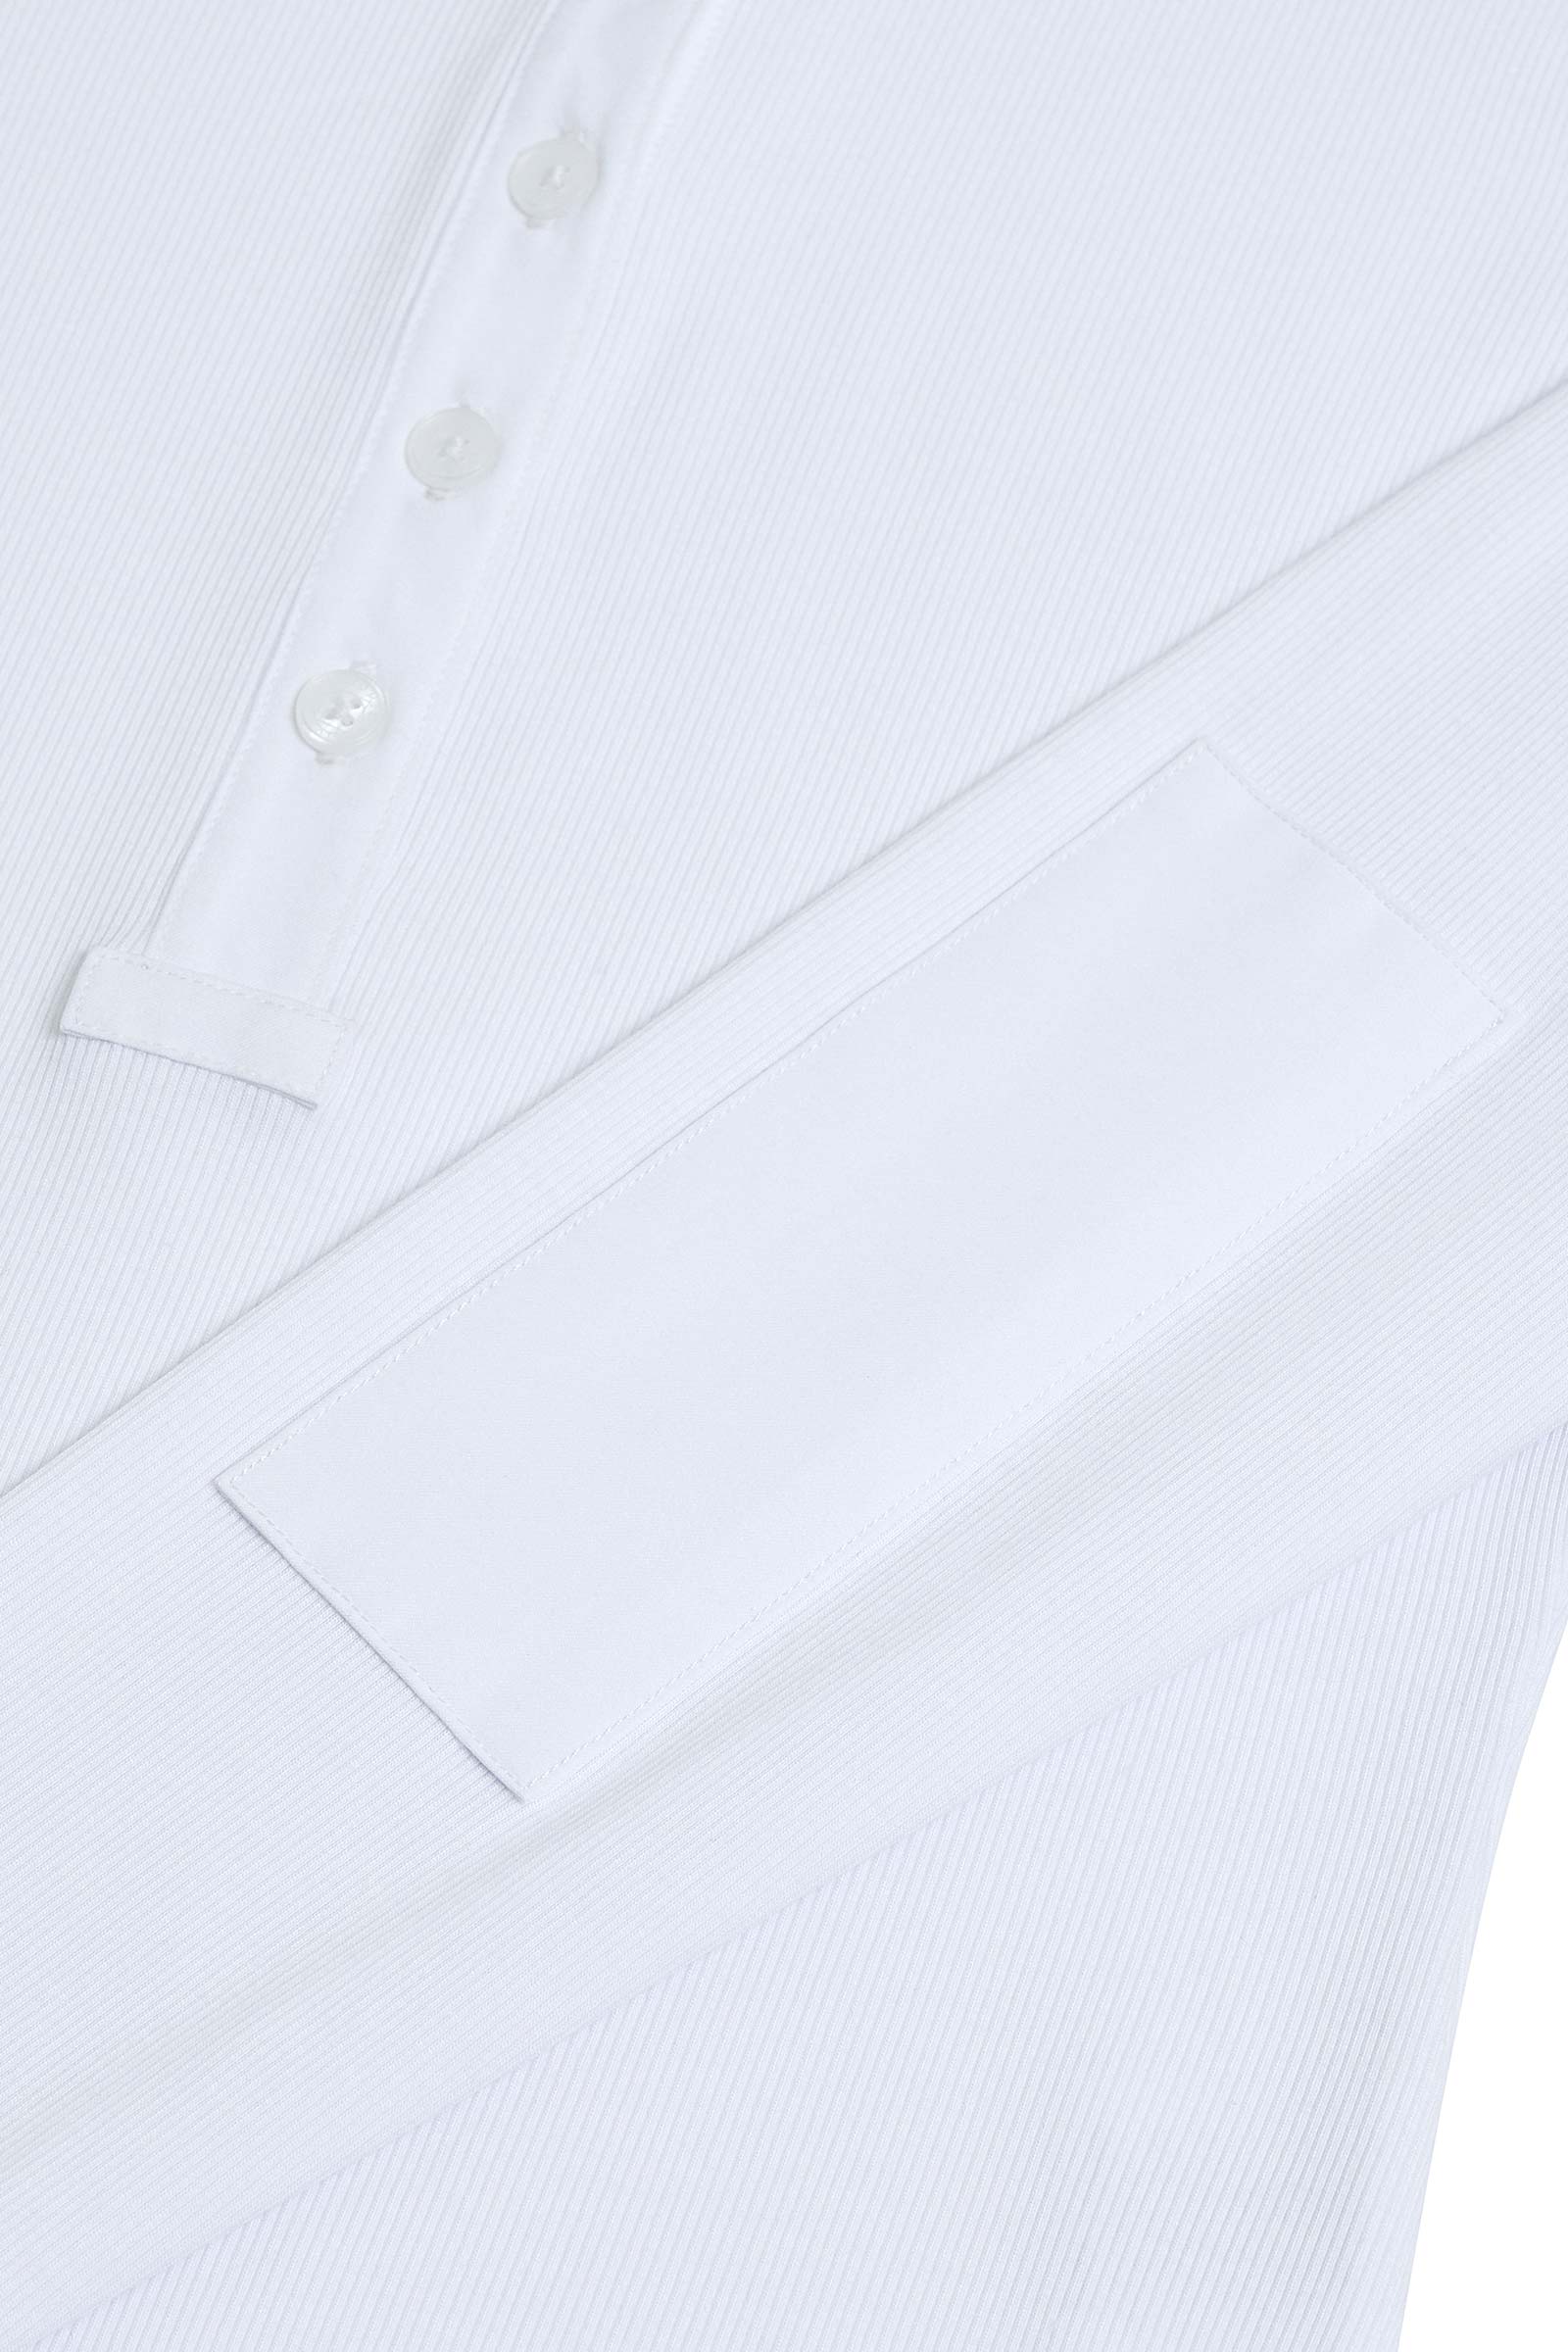 The Best Travel Top. Sleeve Detail of a Monroe Henley Top in White.